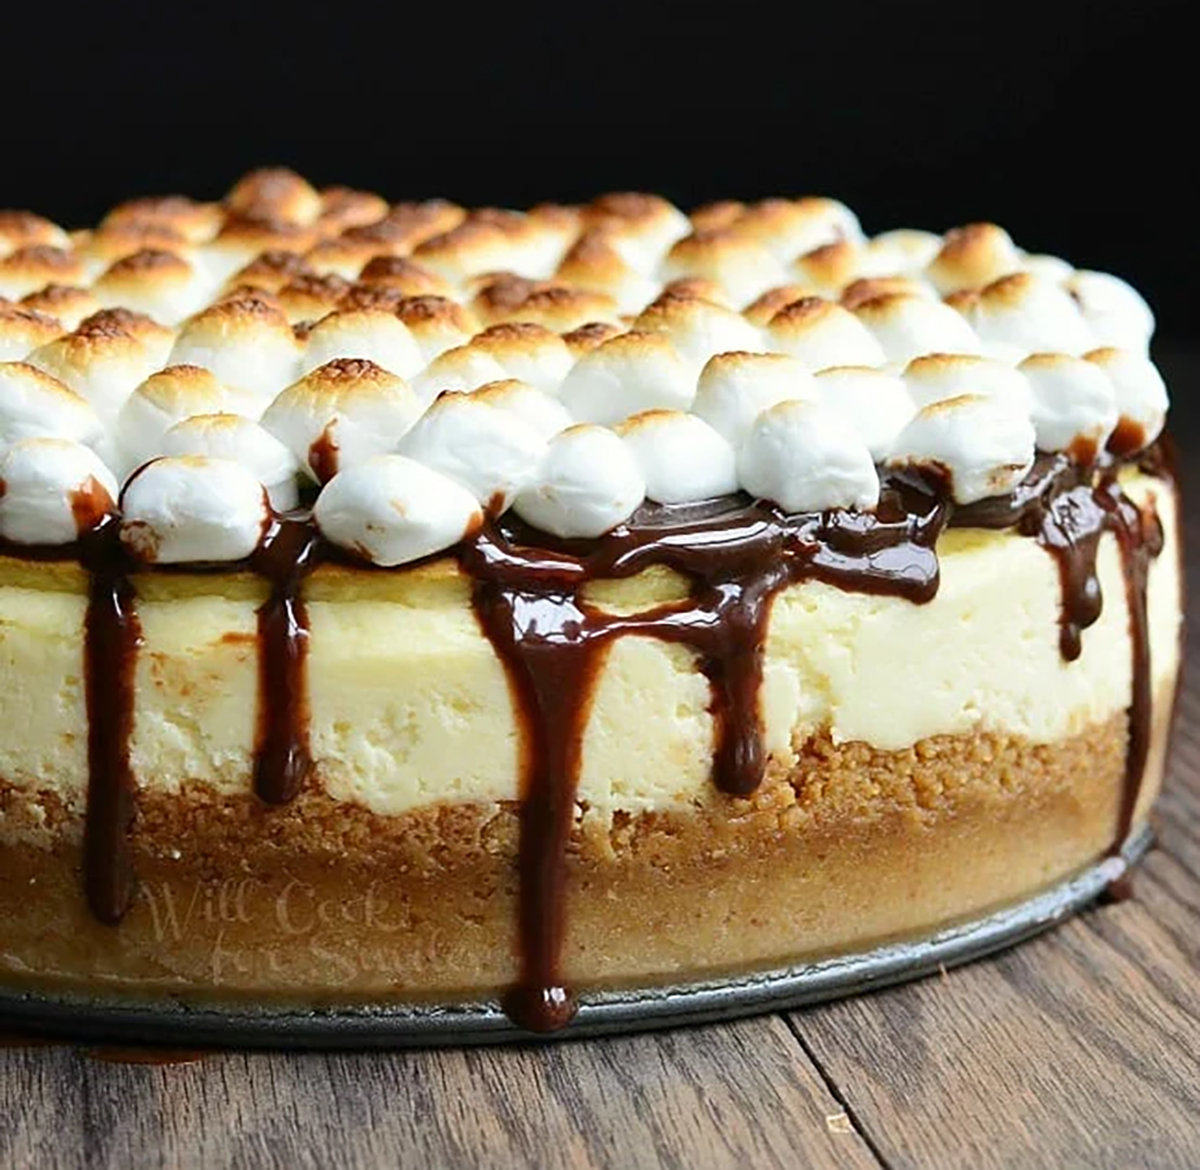 Create 11 Marshmallow Desserts To Satisfy Your Holiday Sweet Tooth